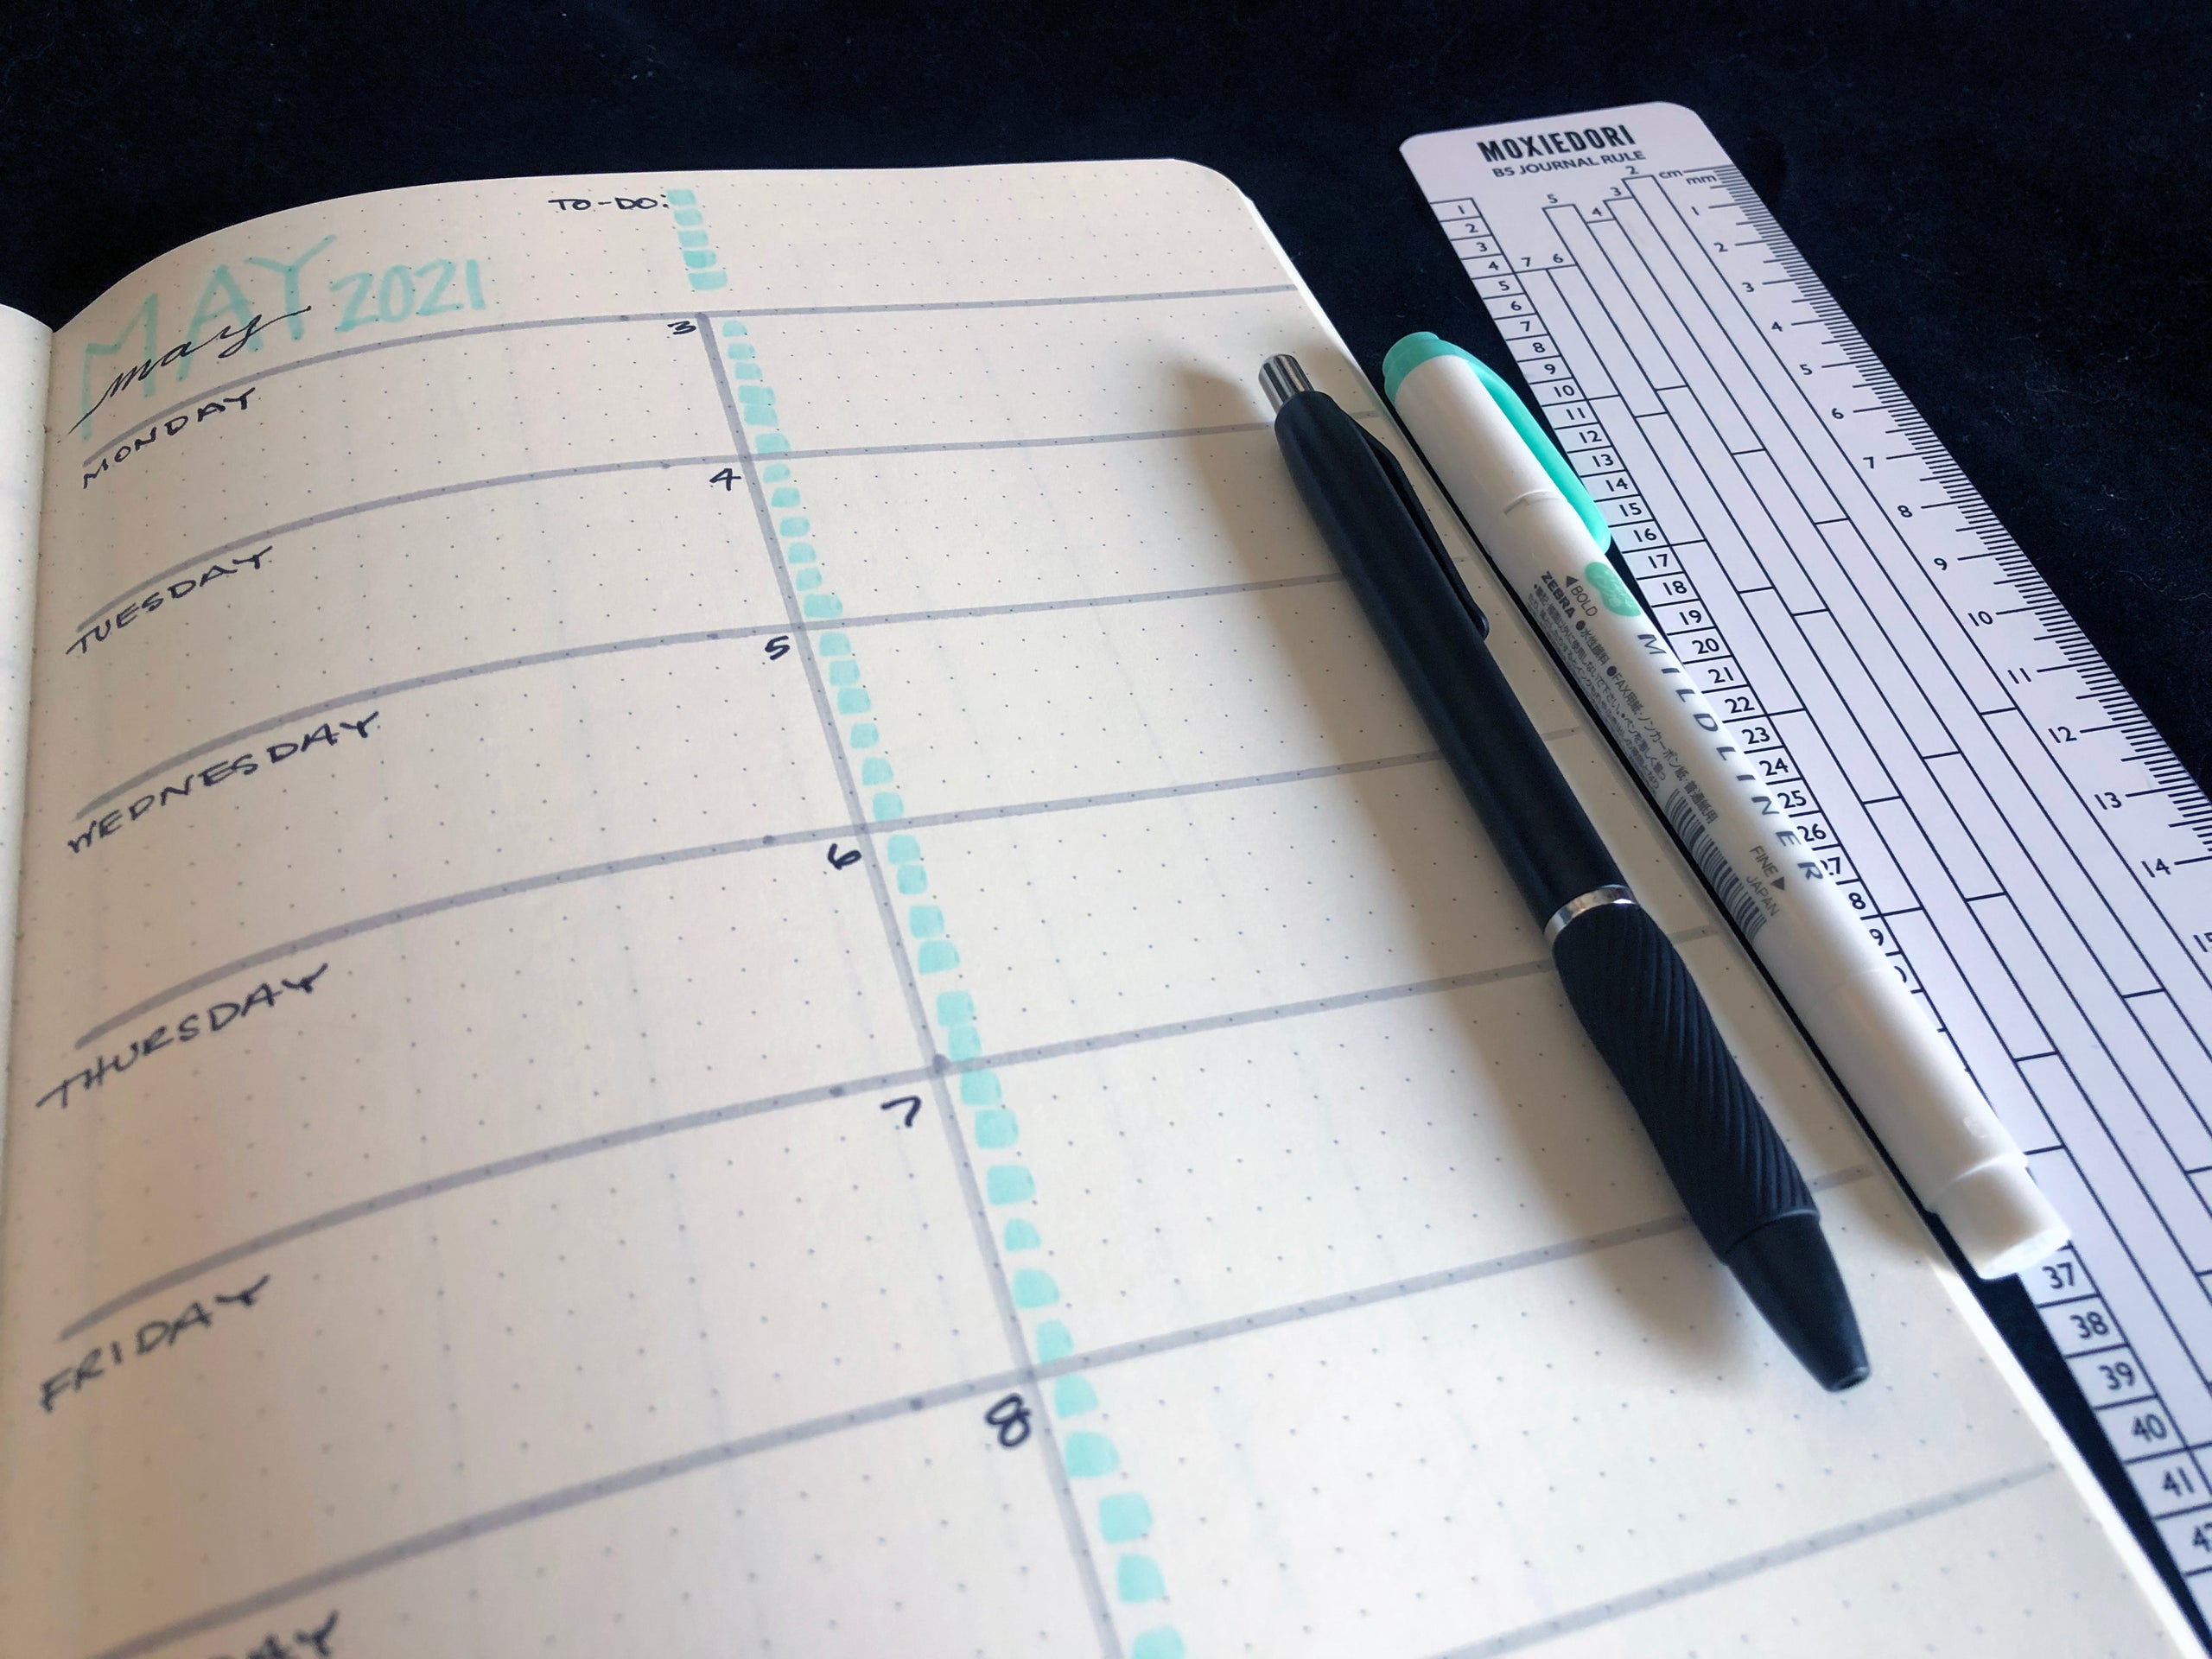 A Cool Ruler with Terrible Name (A Review): The MoxieRule Bullet Journal  Rule Planner Ruler for Journaling and Planning – Frankenlog